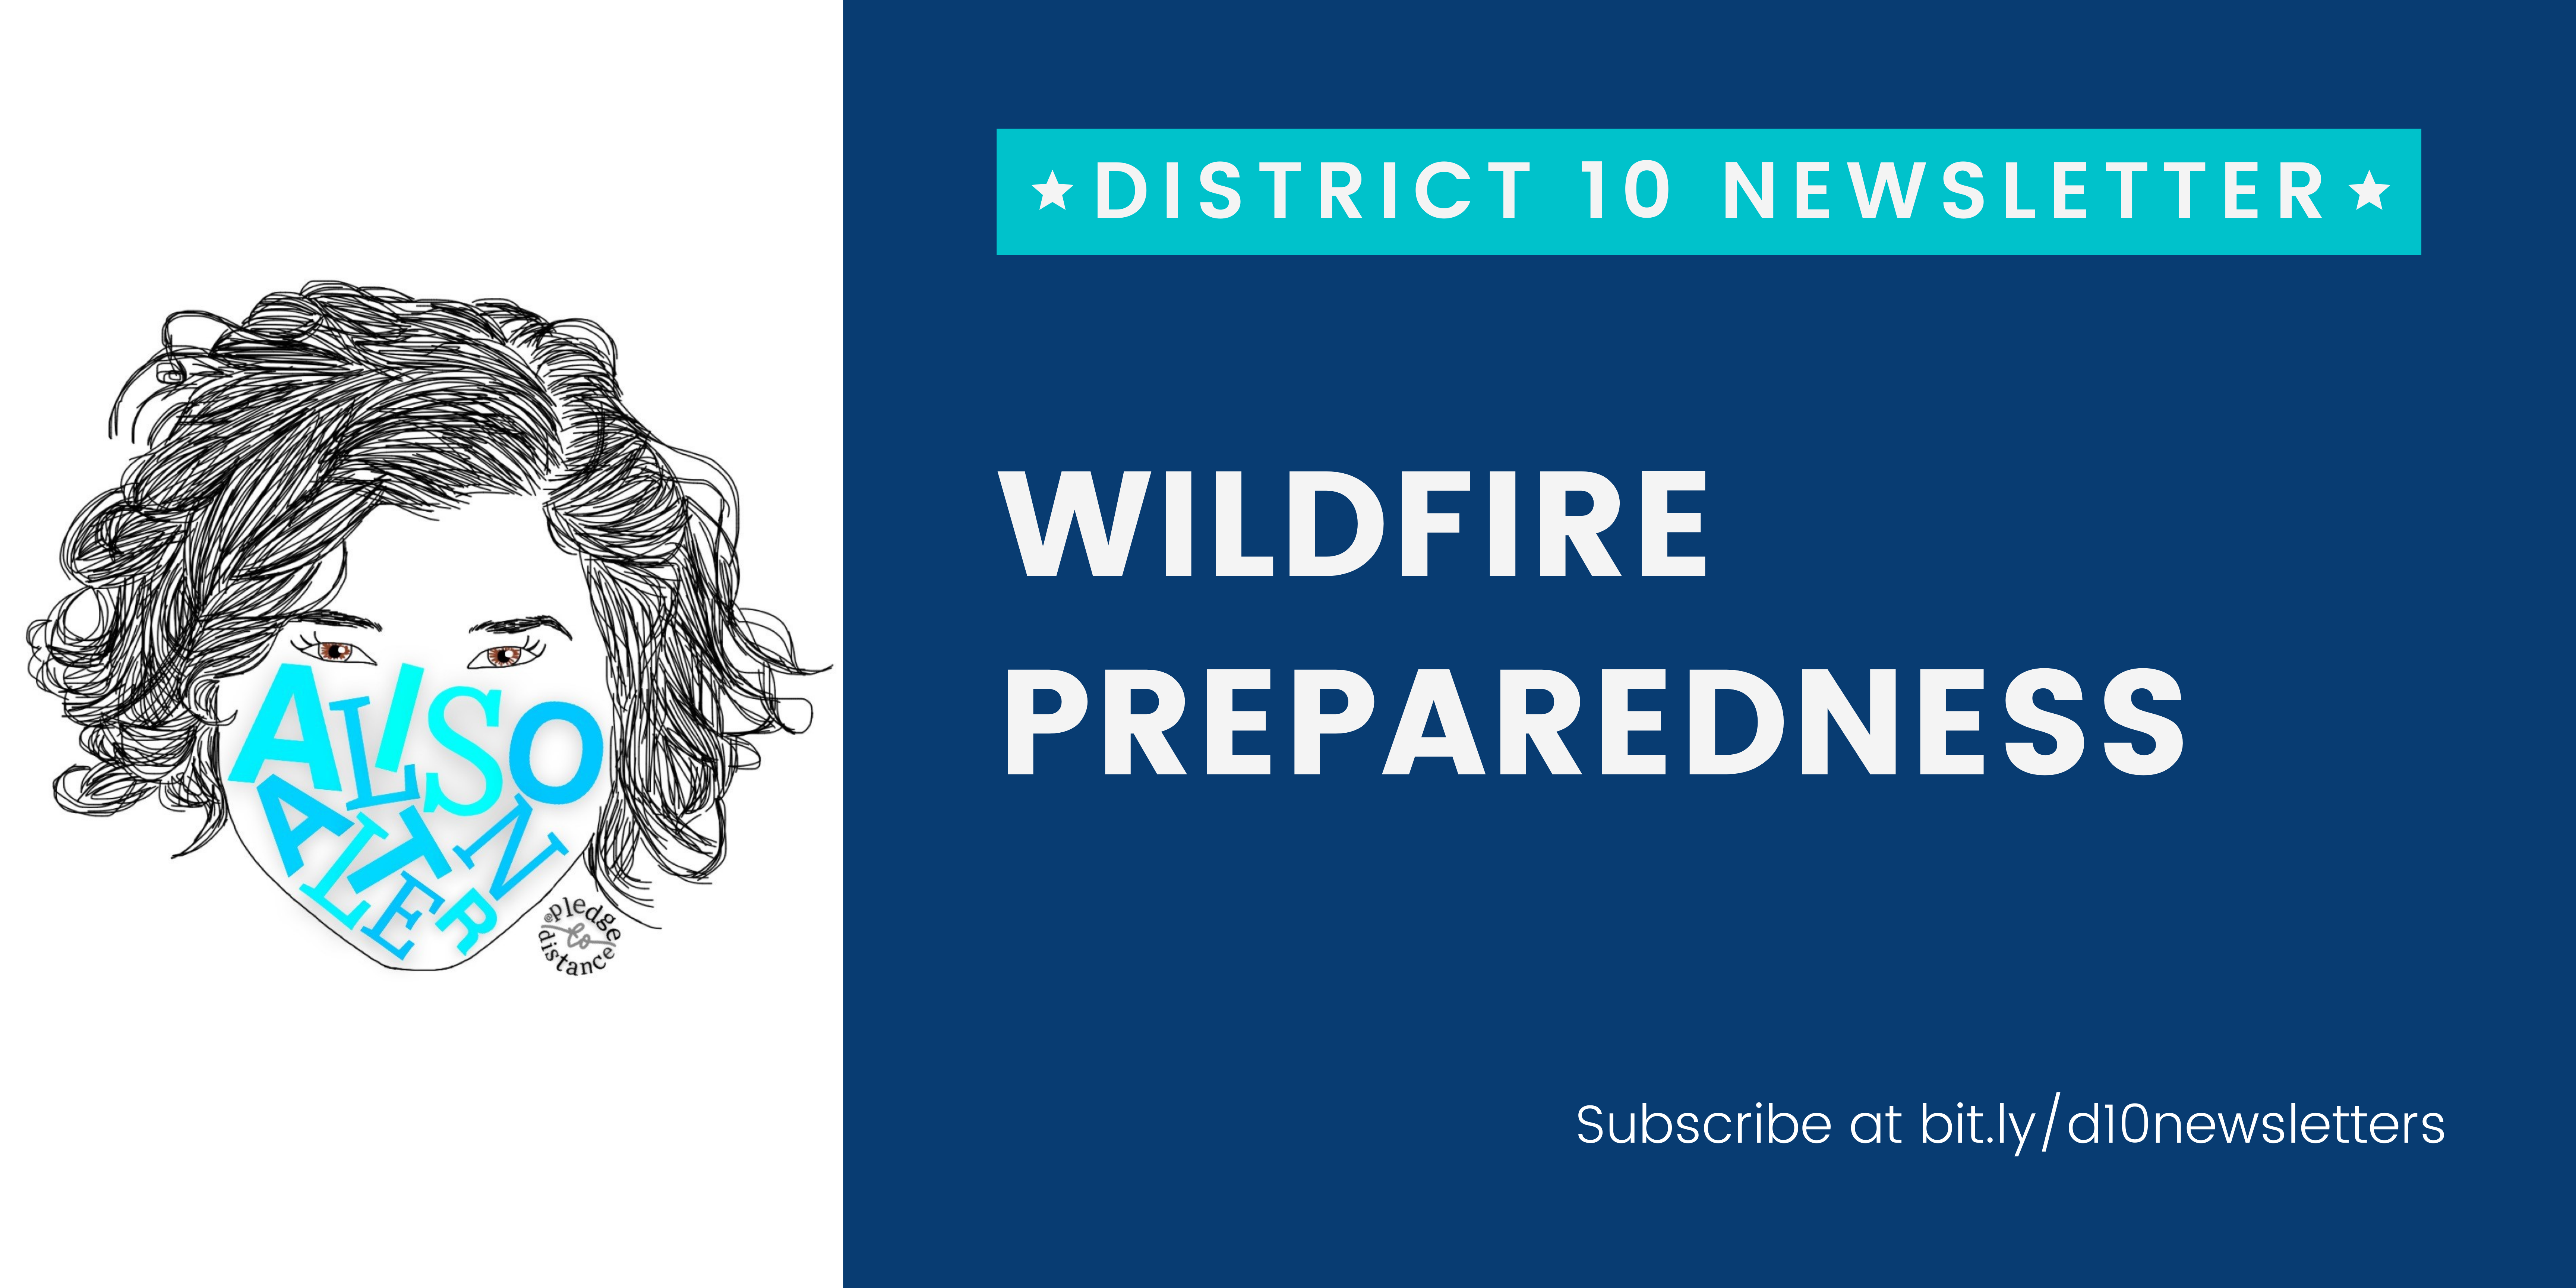 Wildfire Town Hall on August 25th at 6:30 p.m. Join at https://bit.ly/wildfiretownhall